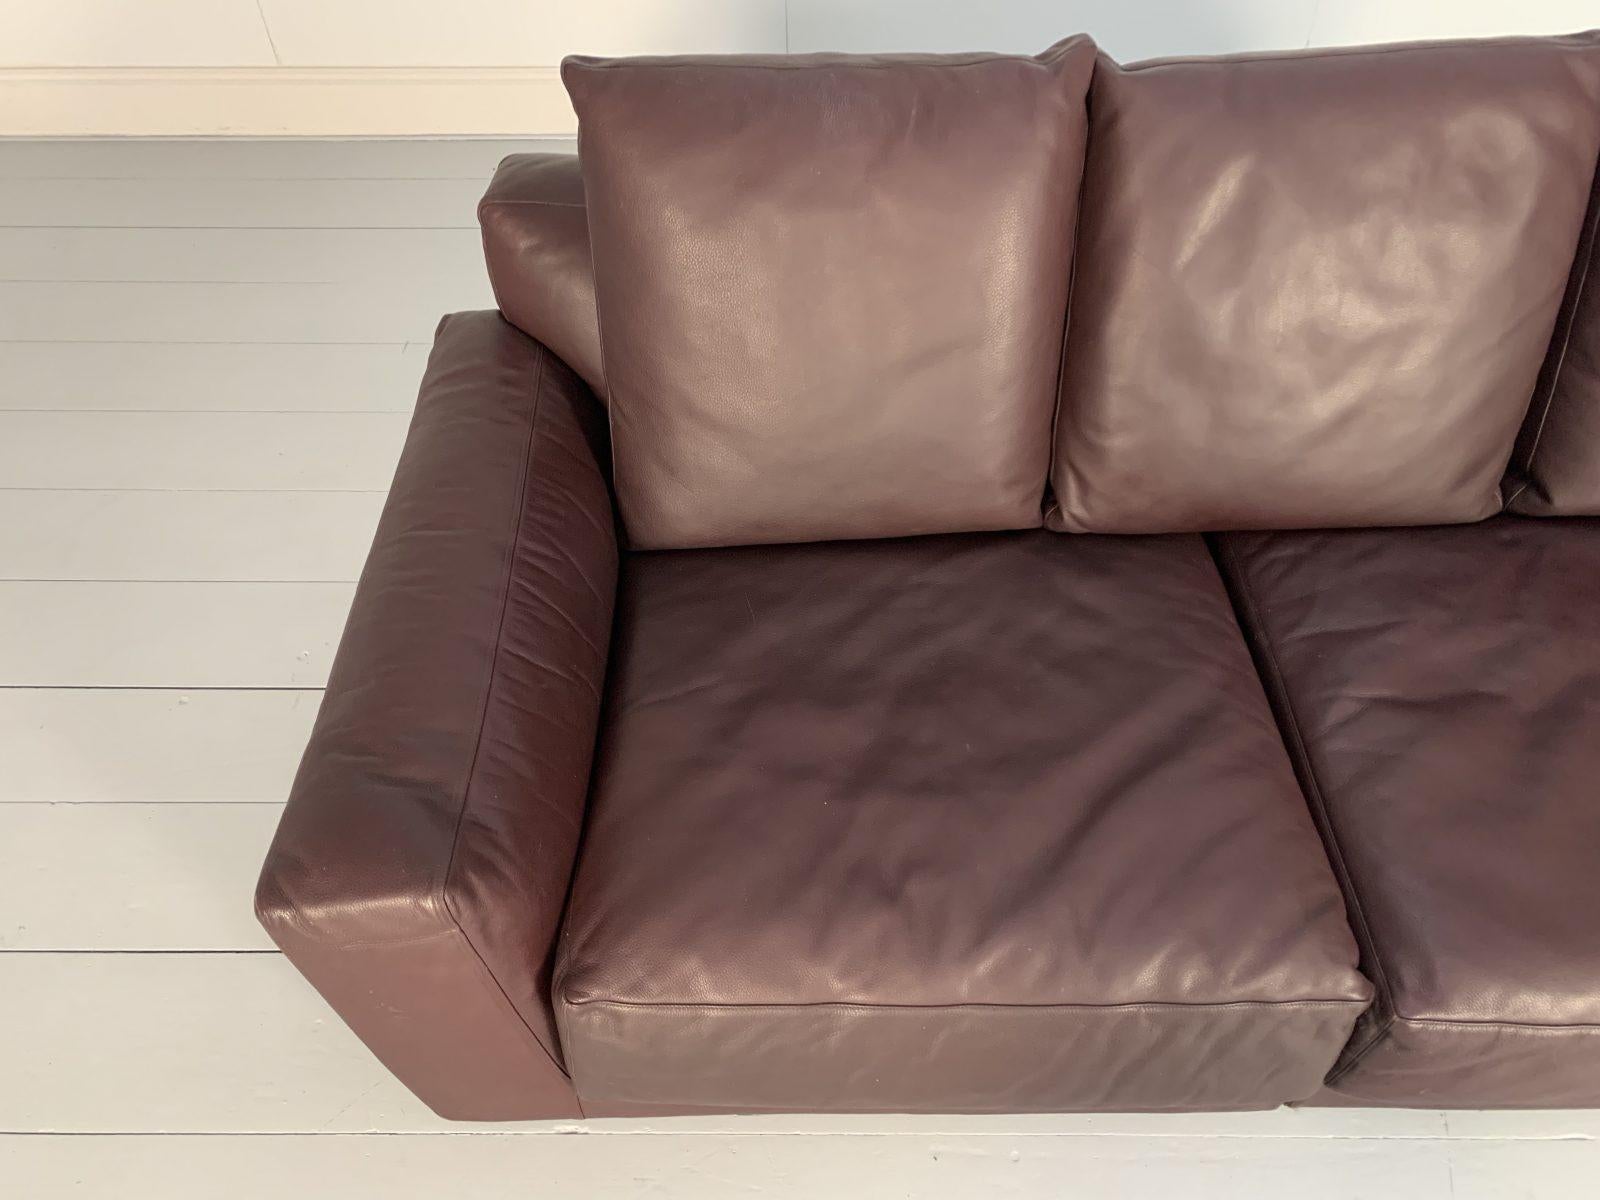 Contemporary B&B Italia “Luis” 3-Seat Chaise-End Sofa in Oxblood Deep Red “Alfa” Leather For Sale